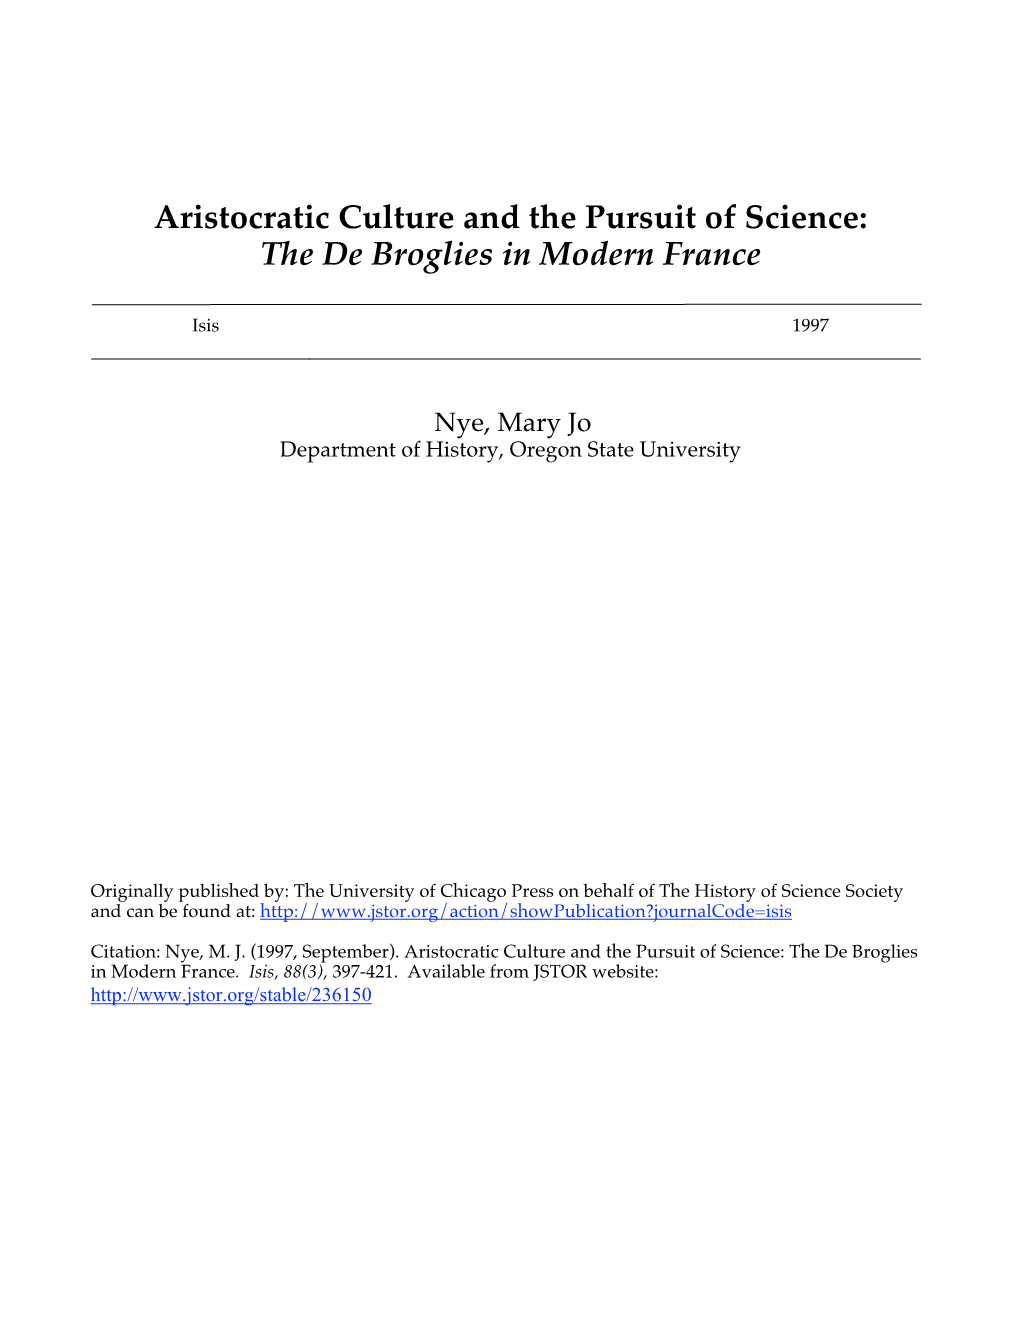 Aristocratic Culture and the Pursuit of Science: the De Broglies in Modern France